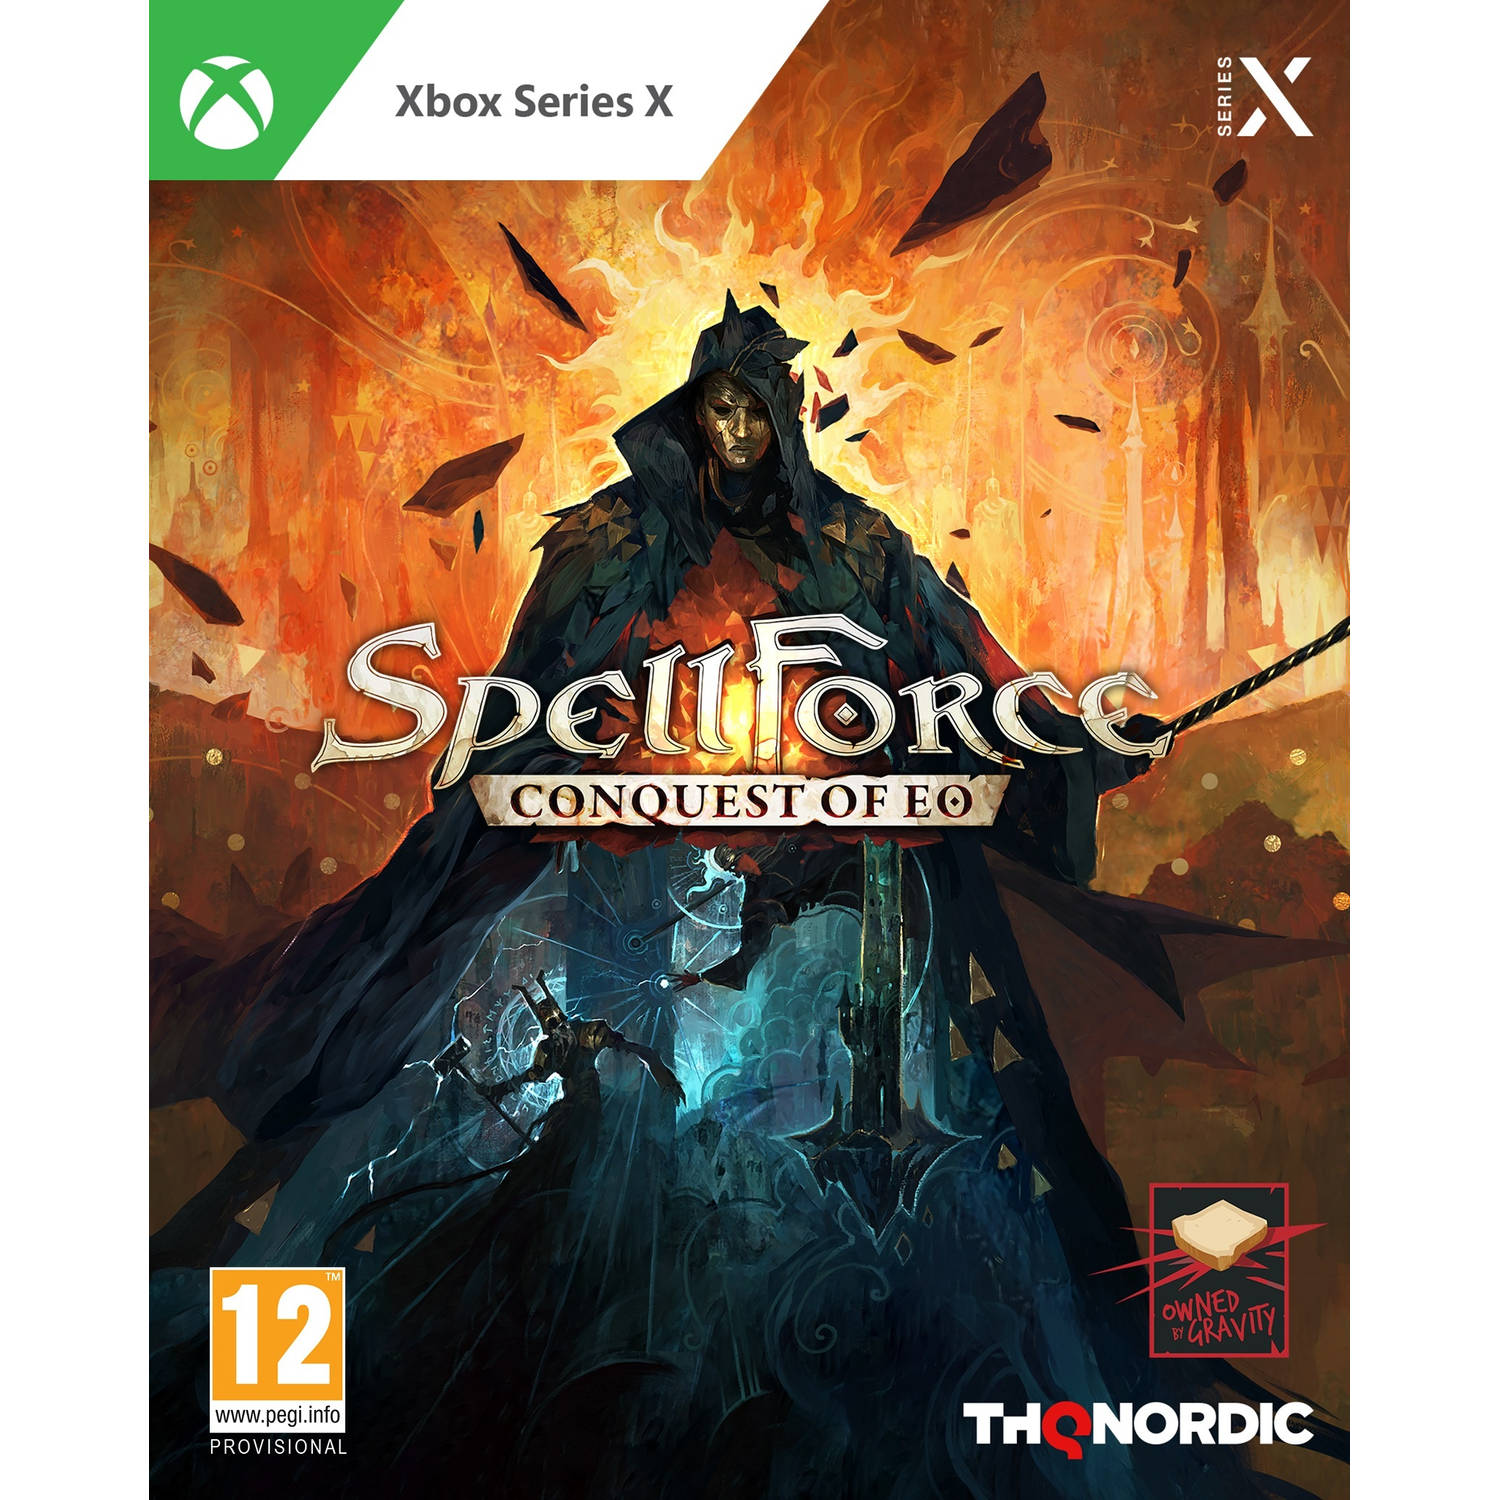 SpellForce Conquest of Eo Xbox Series X